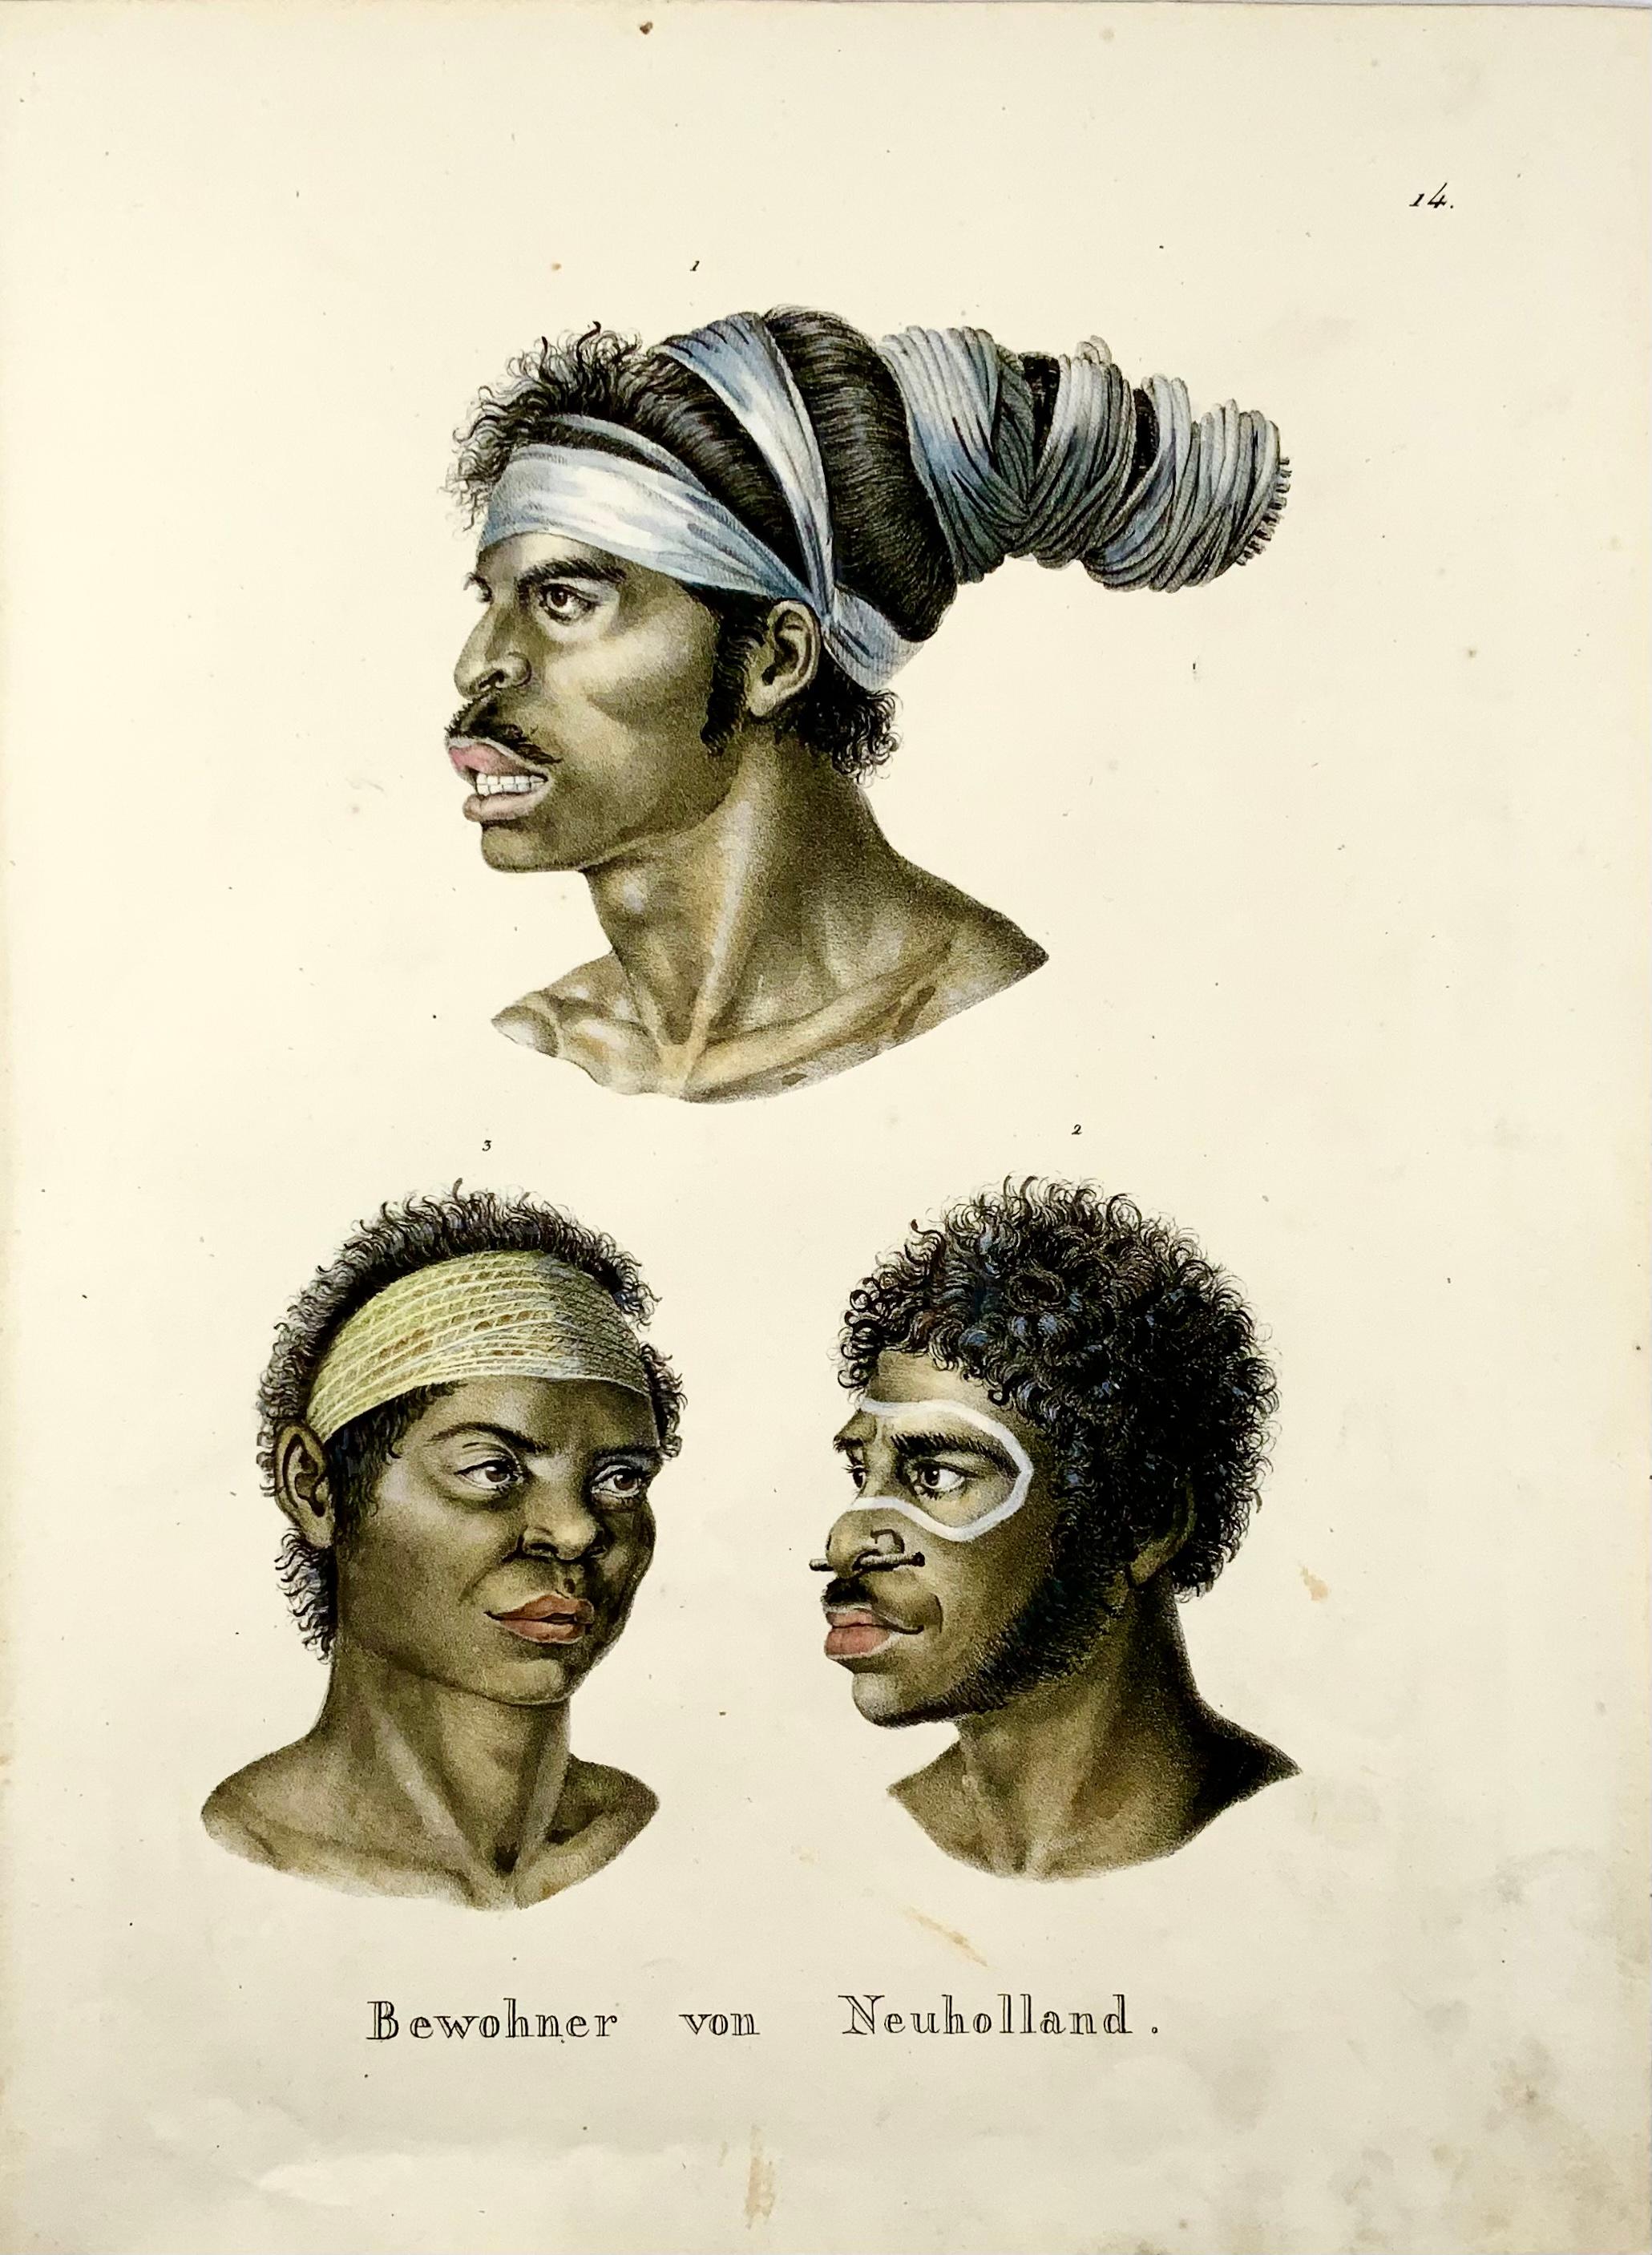 Portraits of Australian aborigines based on Nicholas Petit’s engravings issued in the Baudin voyage account.

1. Top: Aboriginal man with his hair wrapped in paperbark strips told the French artist Nicolas-Martin Petit who was sketching him that